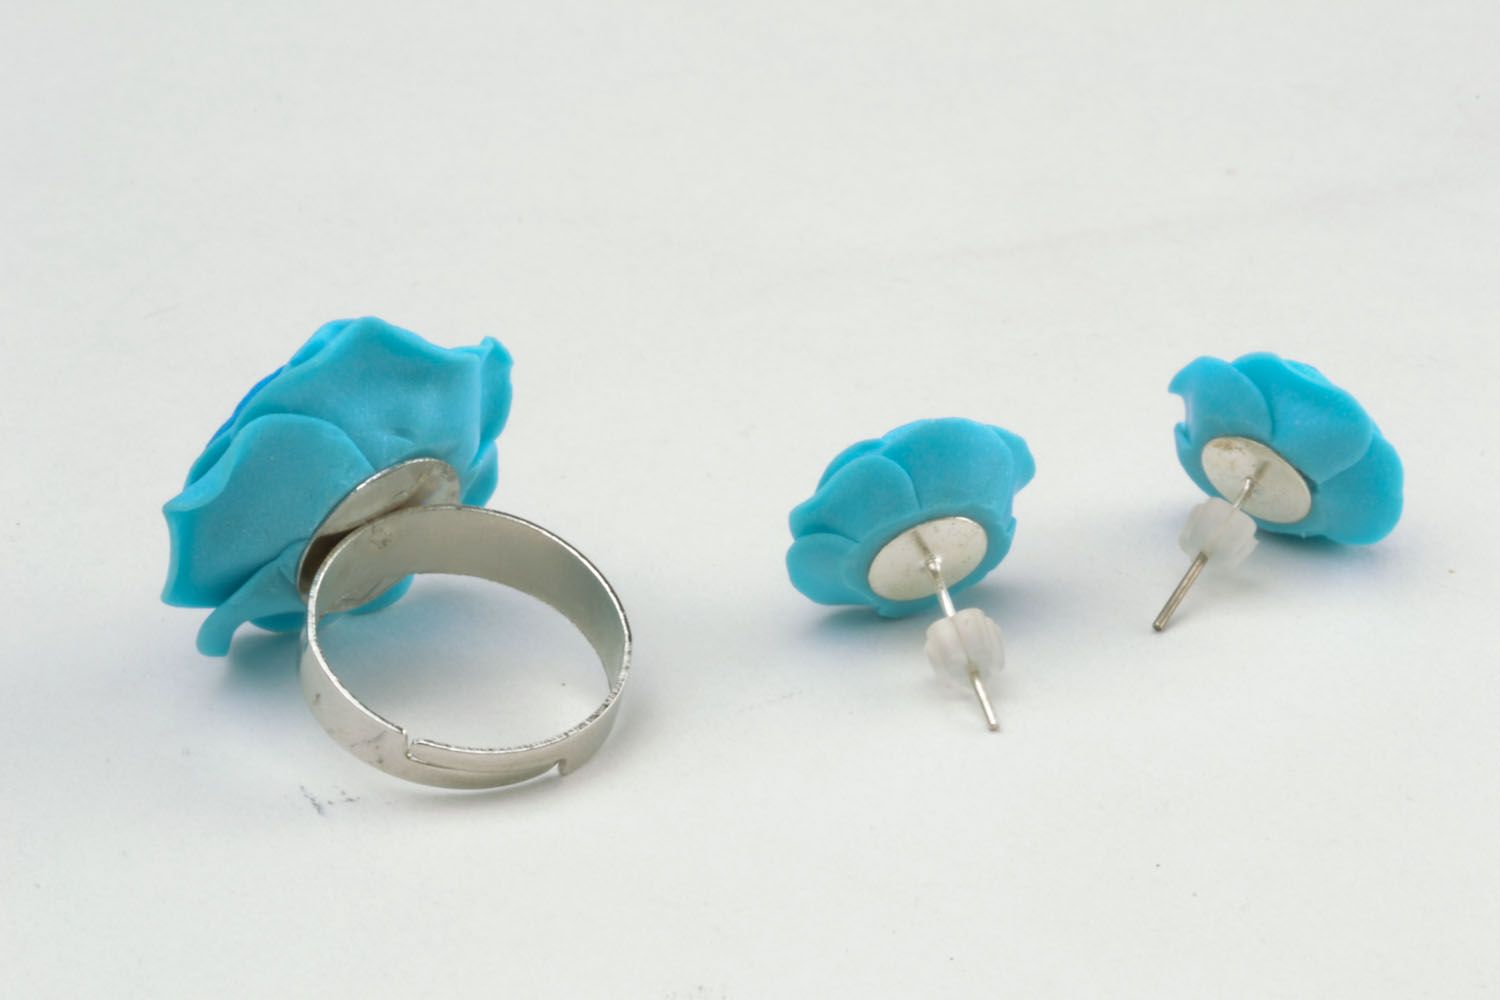 Homemade ring and earrings in the shape of blue roses photo 4